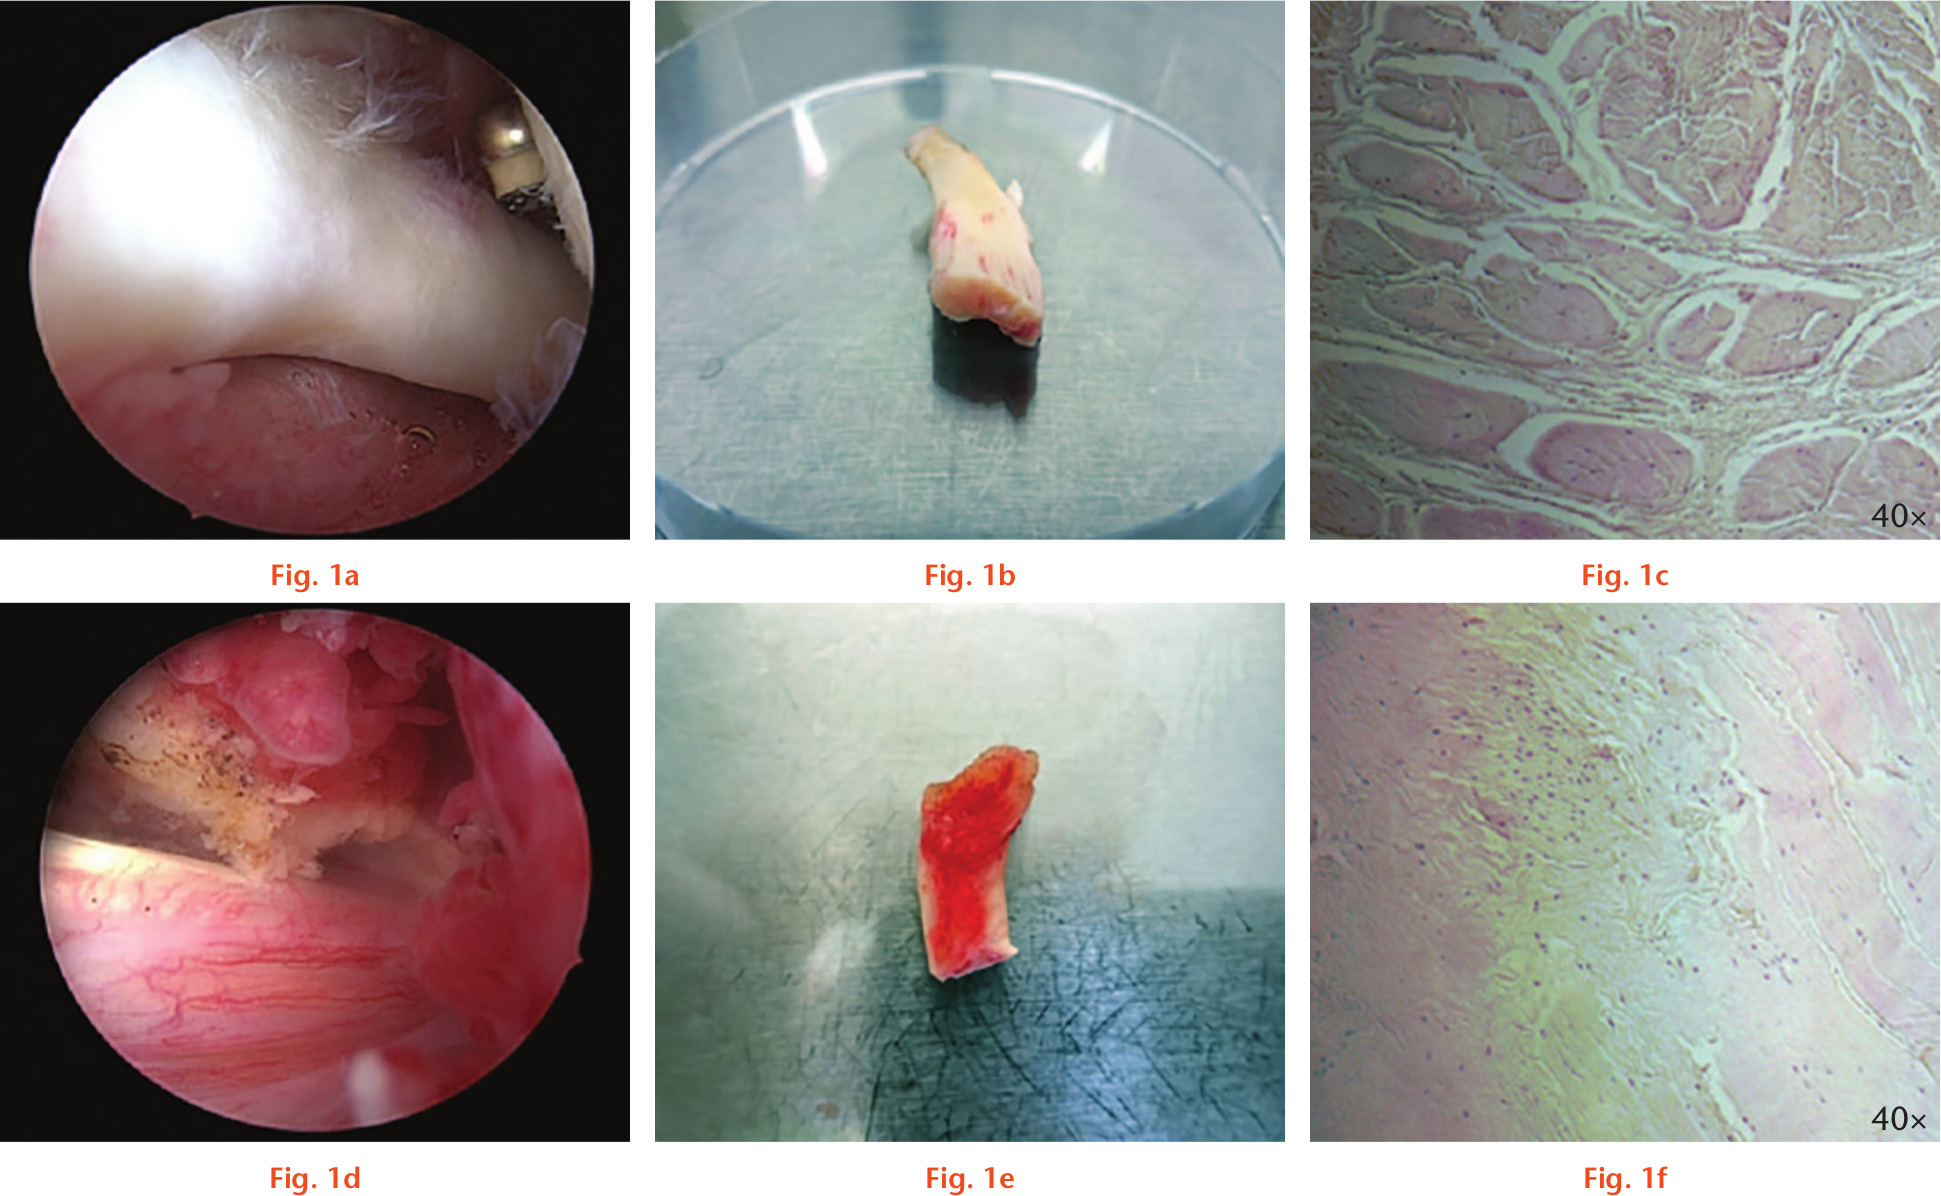 Fig. 1 
            Macroscopic and microscopic view of inflamed and non-inflamed tendon samples. Long head of the biceps (LHB) tendon samples with (d, e, f) and without (a, b, c) tendinitis are shown. a) and d) Intraoperative arthroscopic view. b) and e) Tendon samples before processing in the laboratory in a 10 cm petri dish. c) and f) Microscopic appearance with haematoxylin and eosin (H&E) stain. Images are taken at 40× as indicated.
          